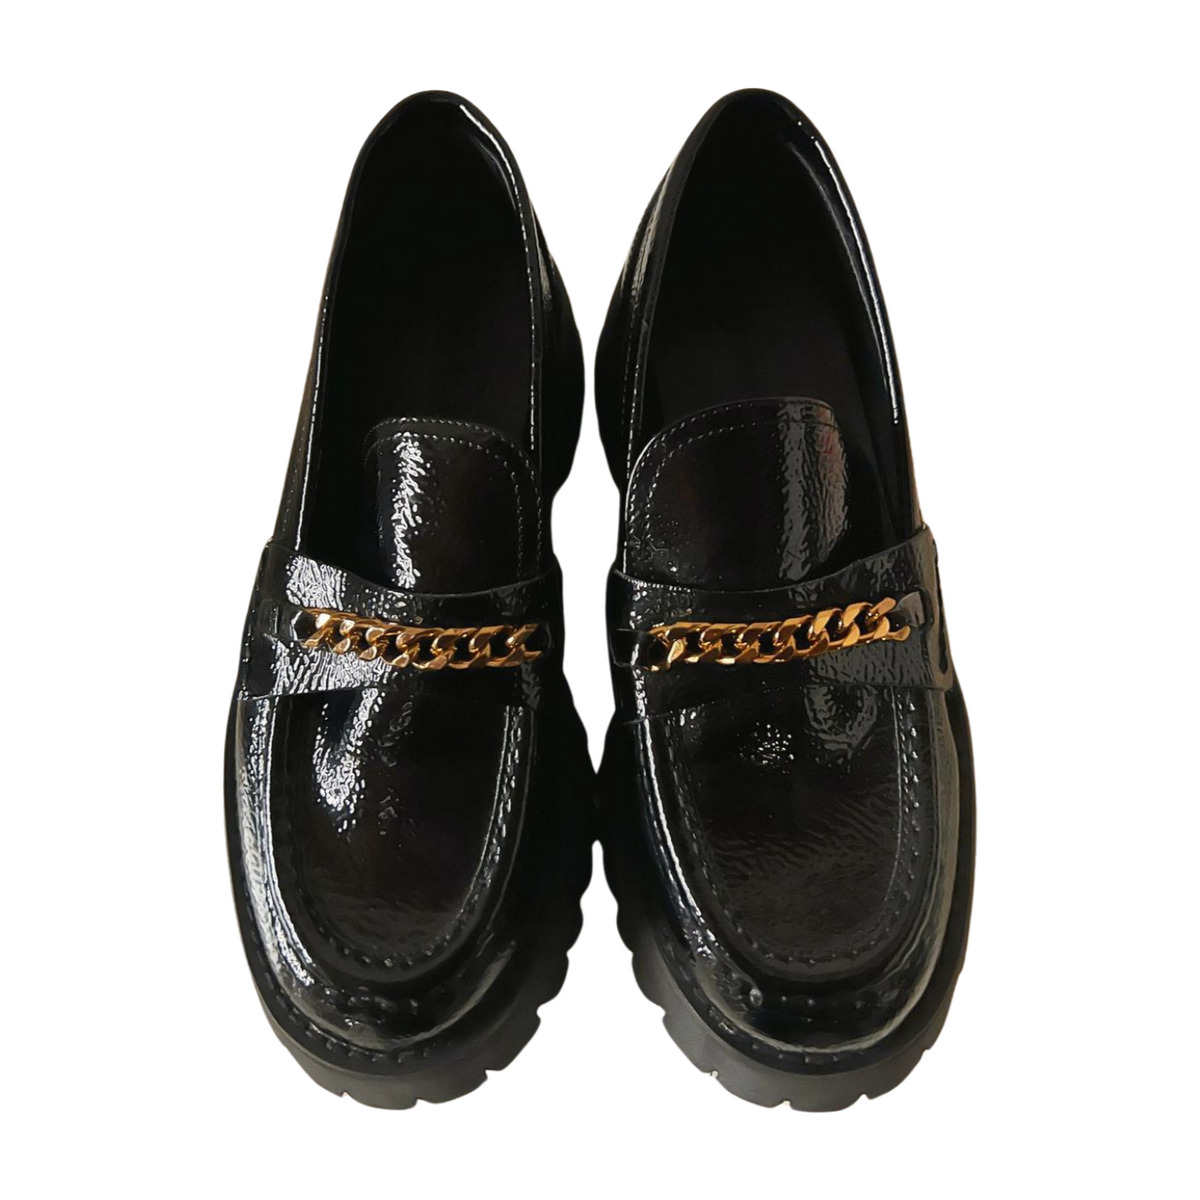 Princess Polly- Black Loafers